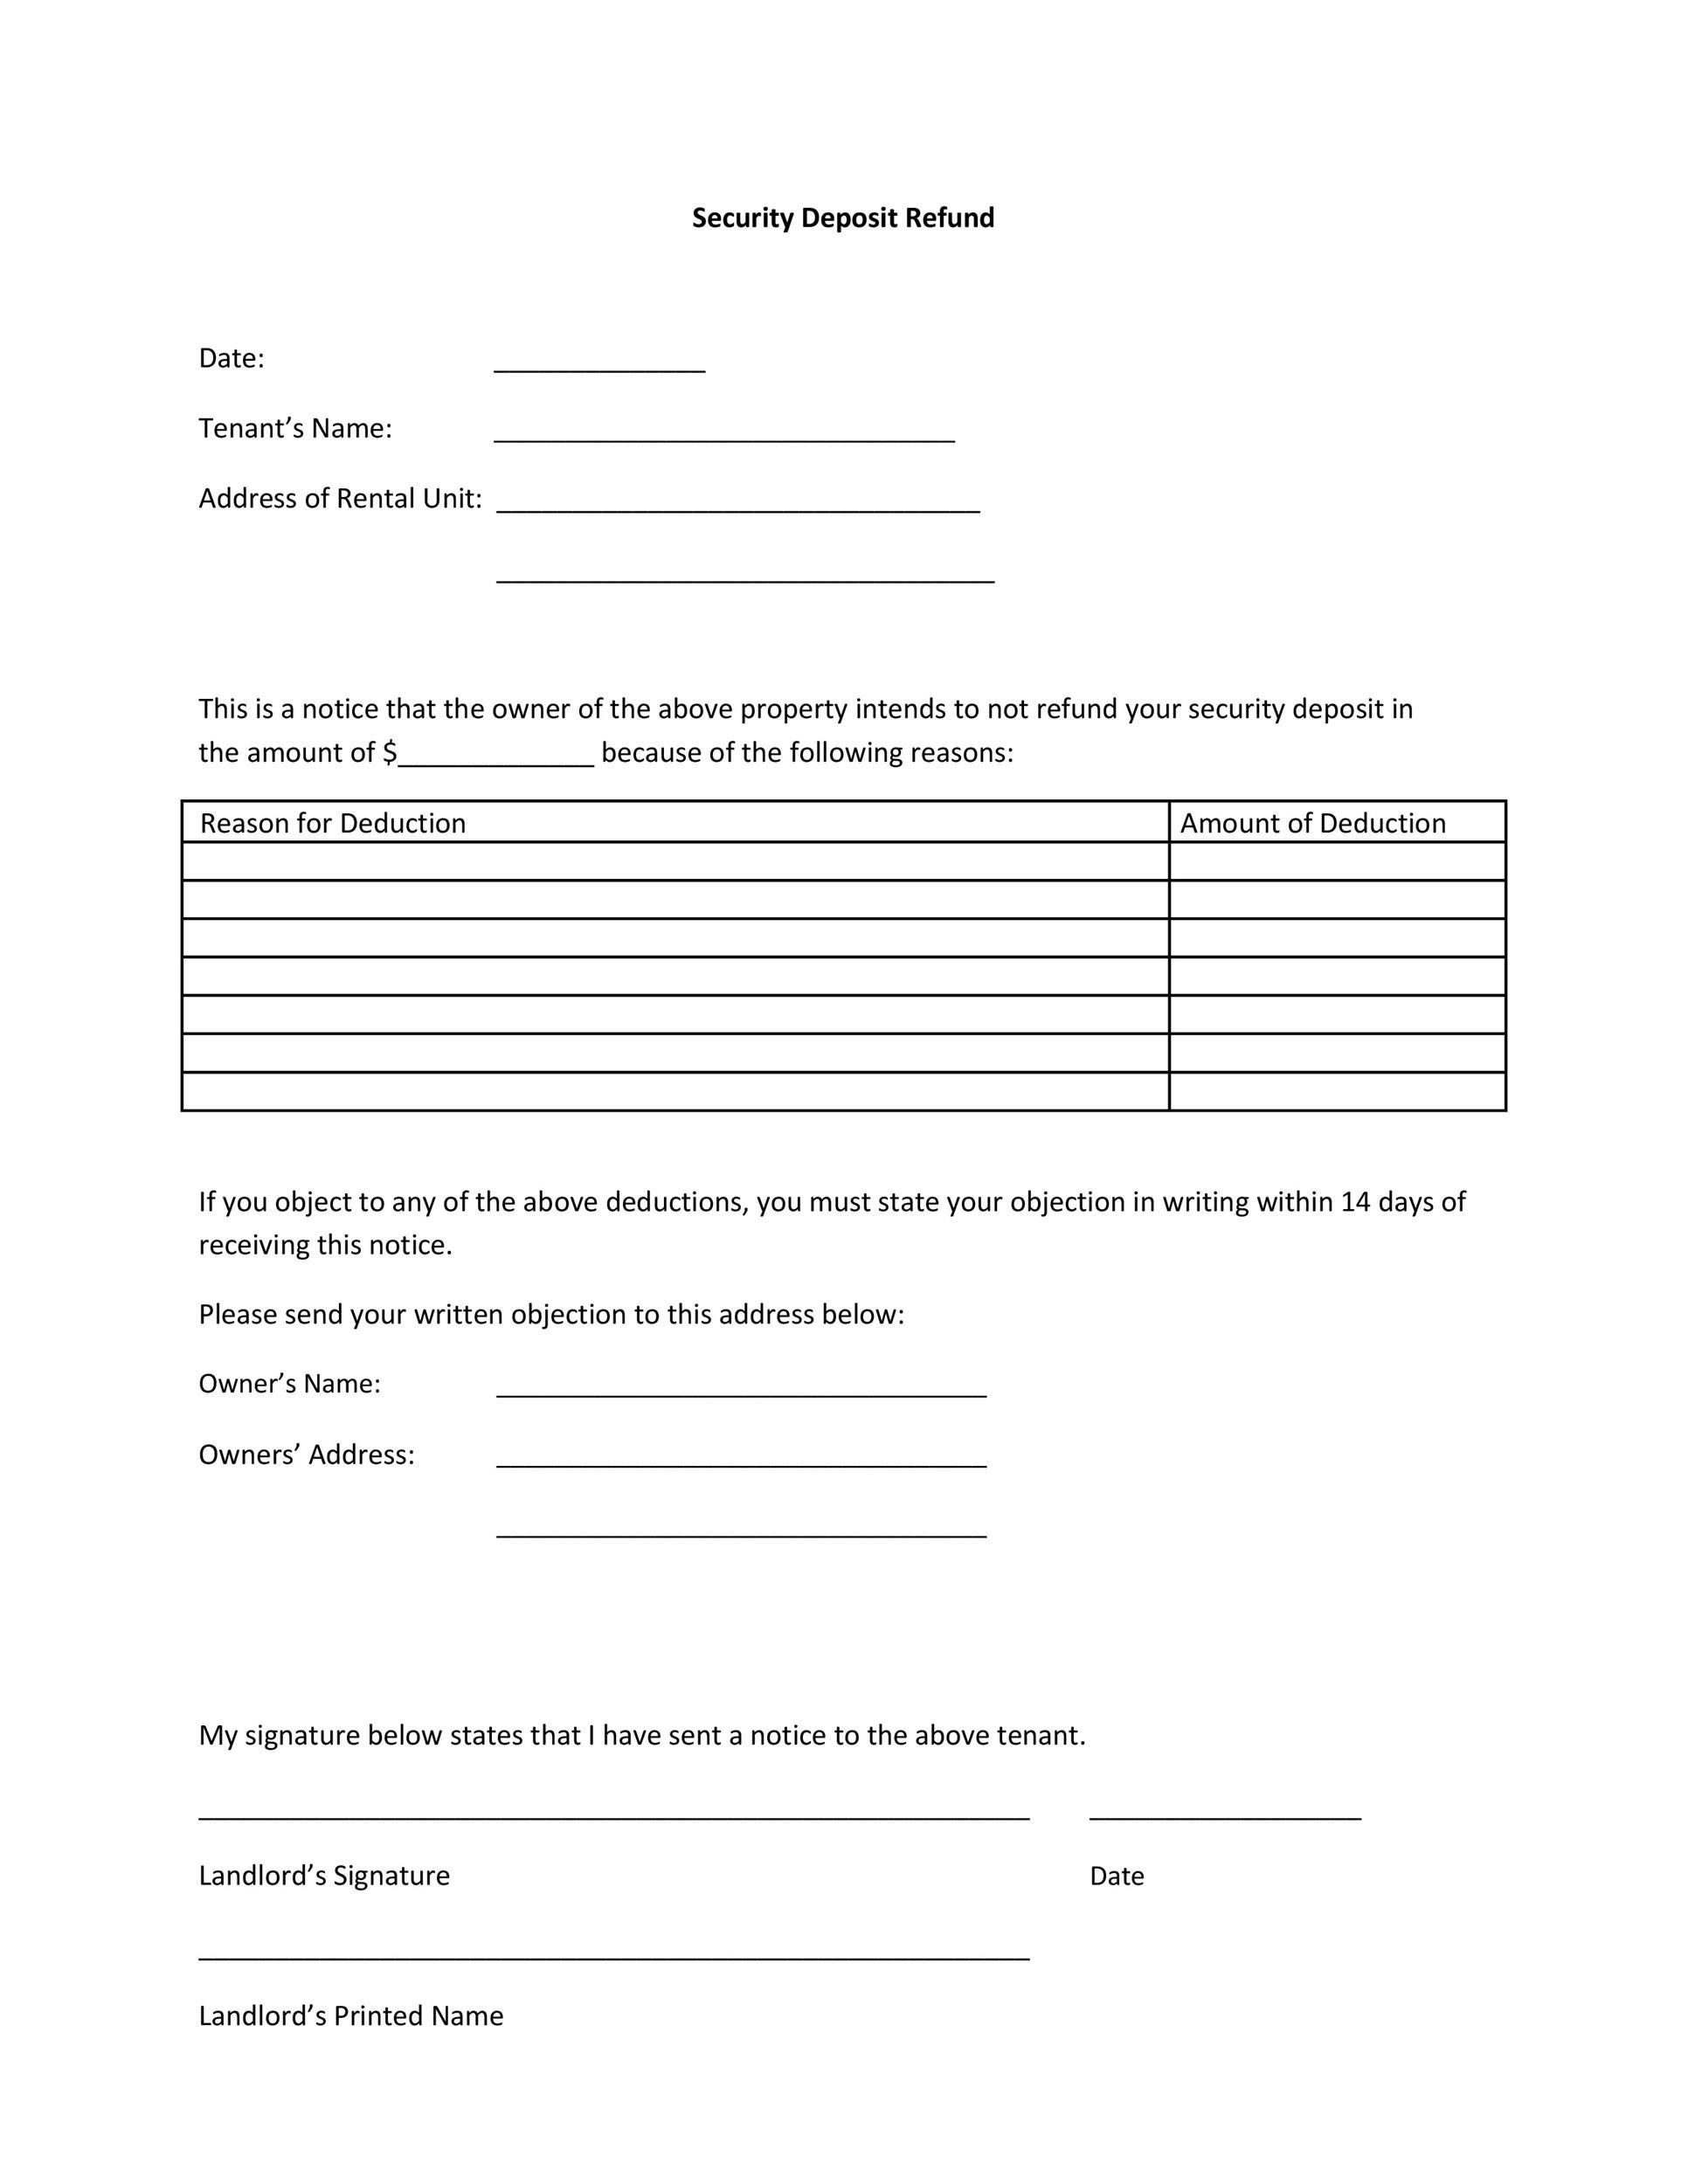 10 Effective Security Deposit Return Letters [MS Word] ᐅ TemplateLab With Landlord Letter To Tenant Regarding Security Deposit Return Throughout Landlord Letter To Tenant Regarding Security Deposit Return